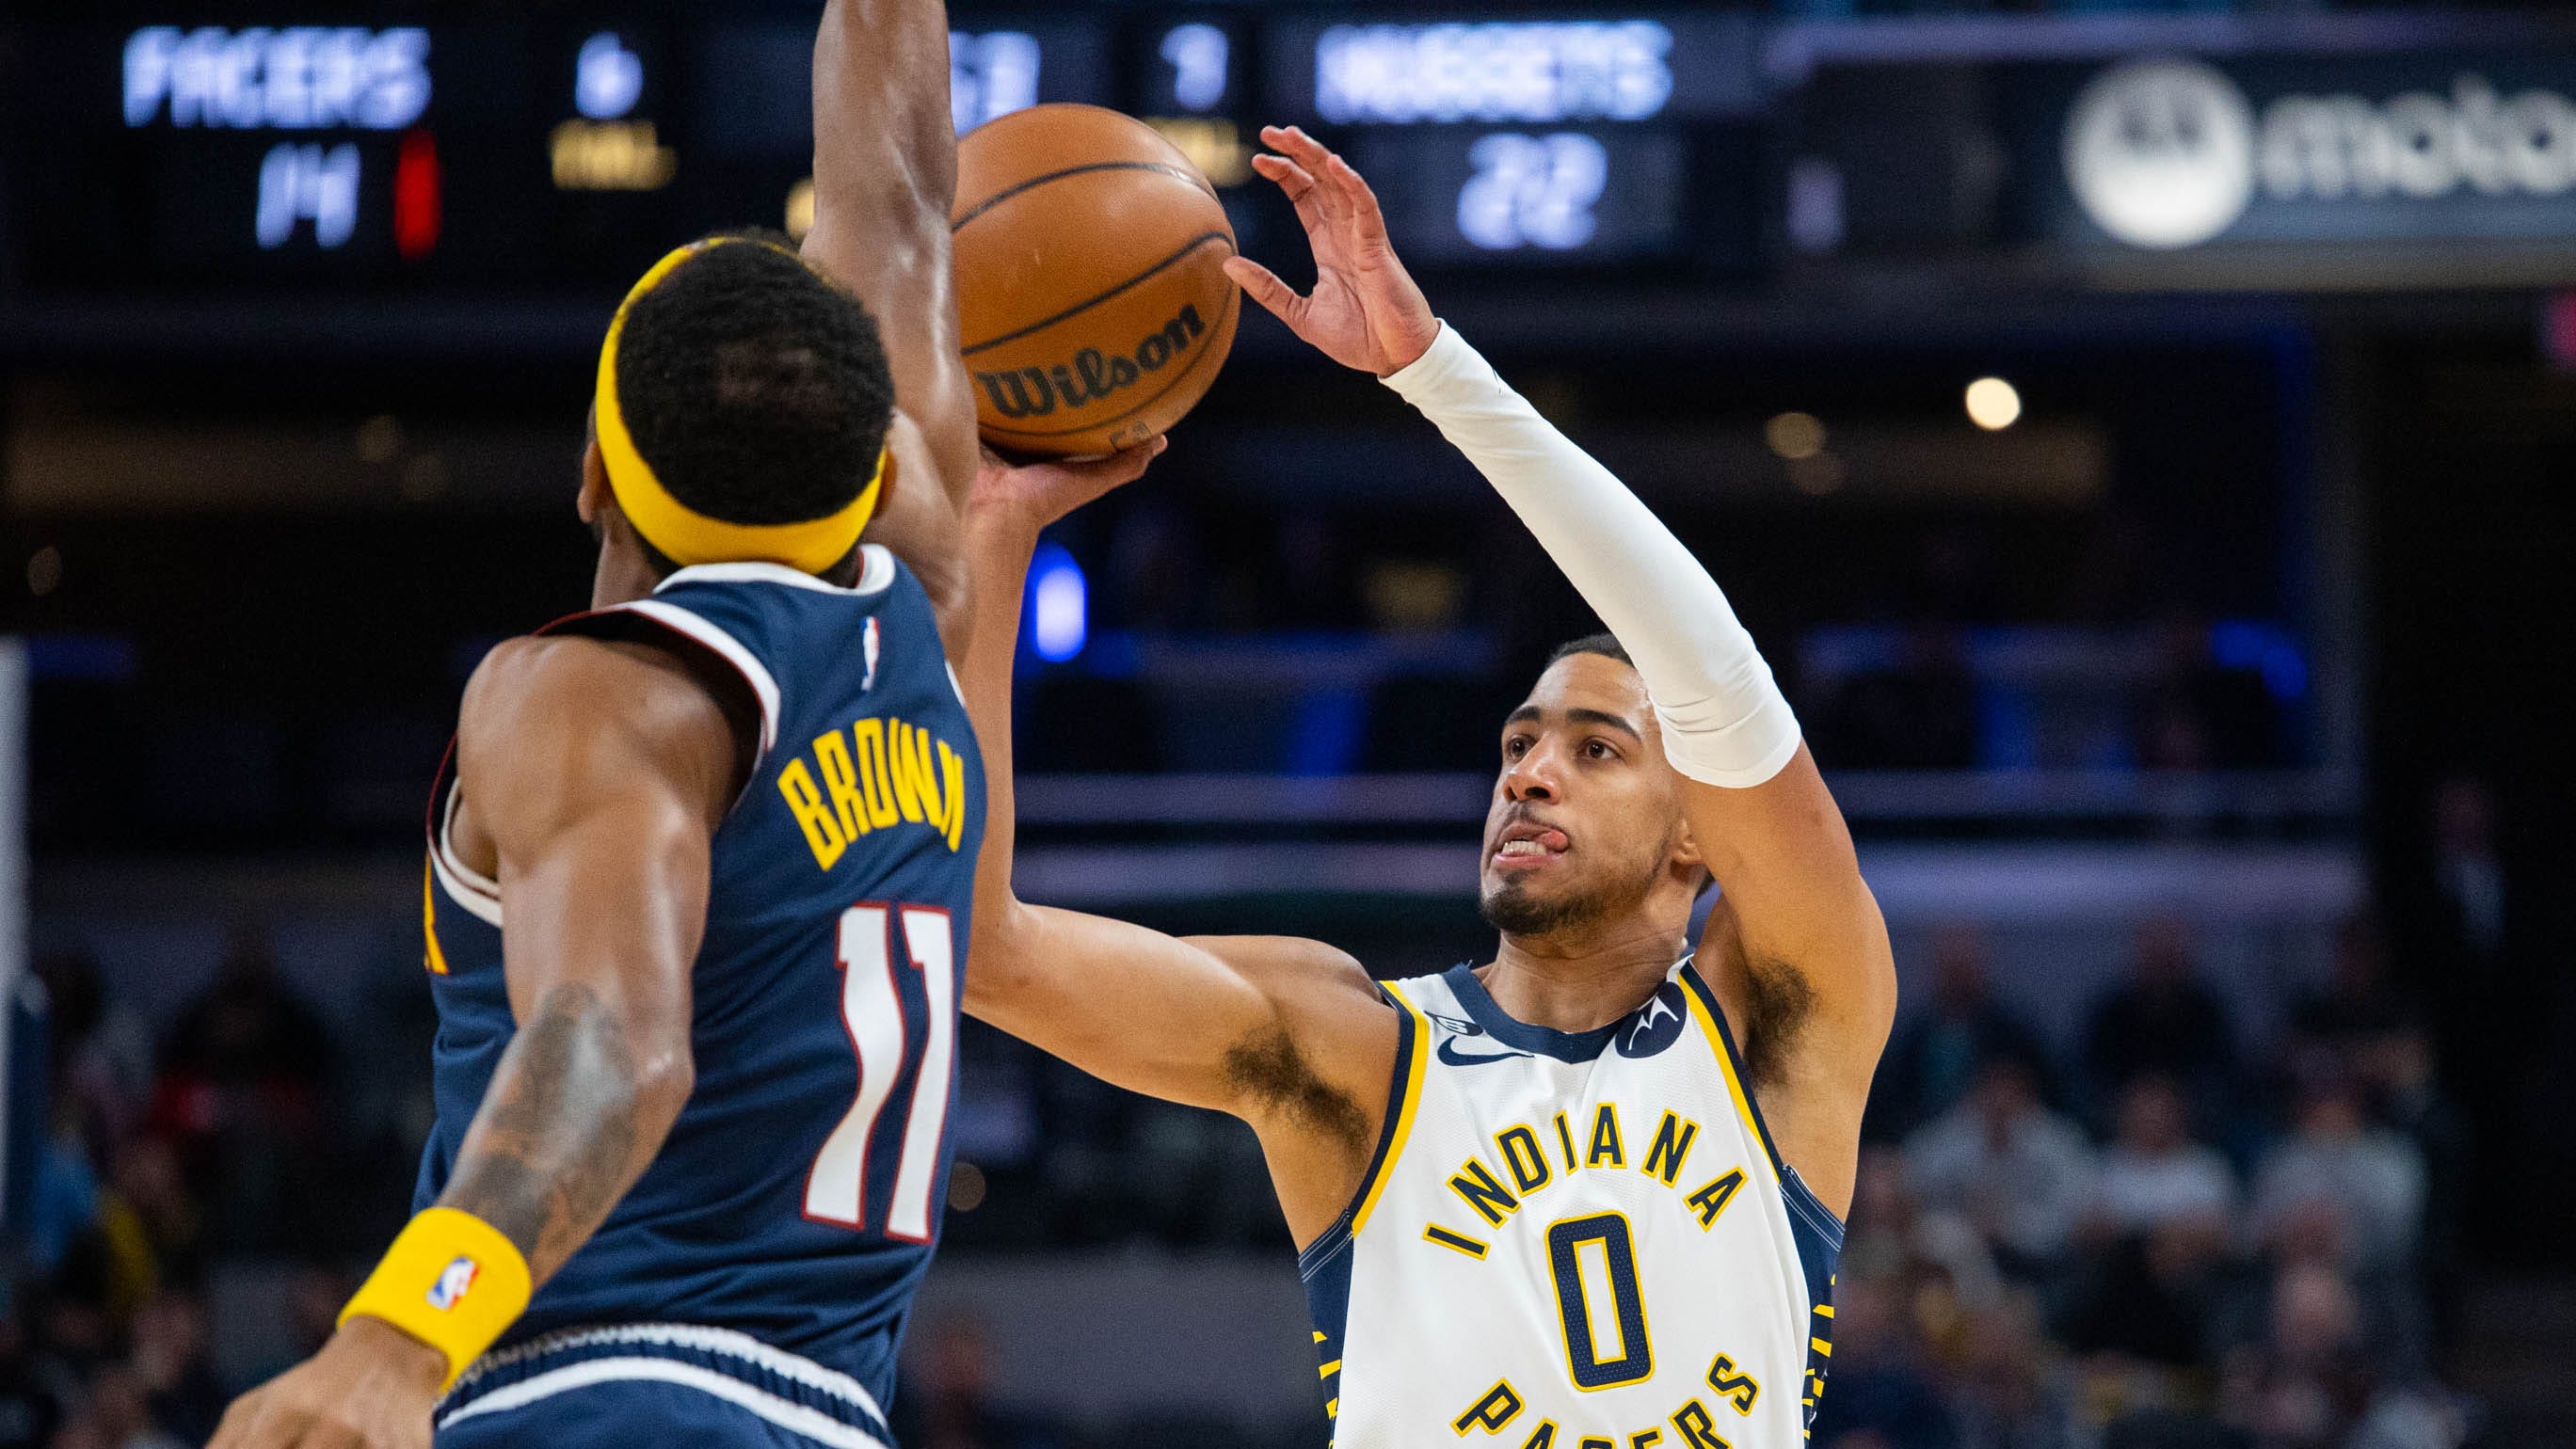 Pacers are on pace to set franchise records for 3point shooting